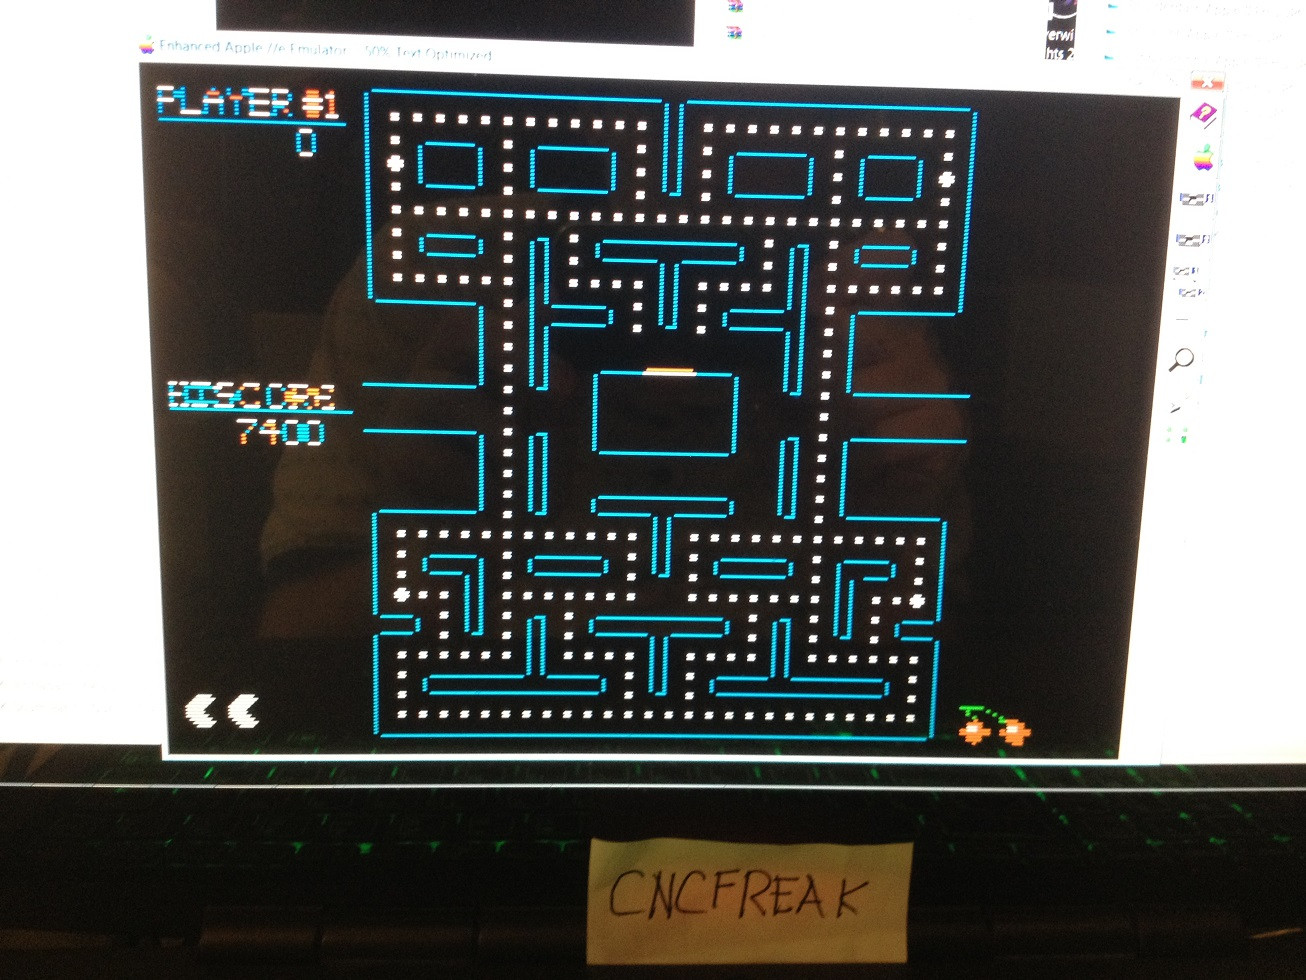 cncfreak: Pac-Man (Apple II Emulated) 7,400 points on 2013-10-16 23:07:02